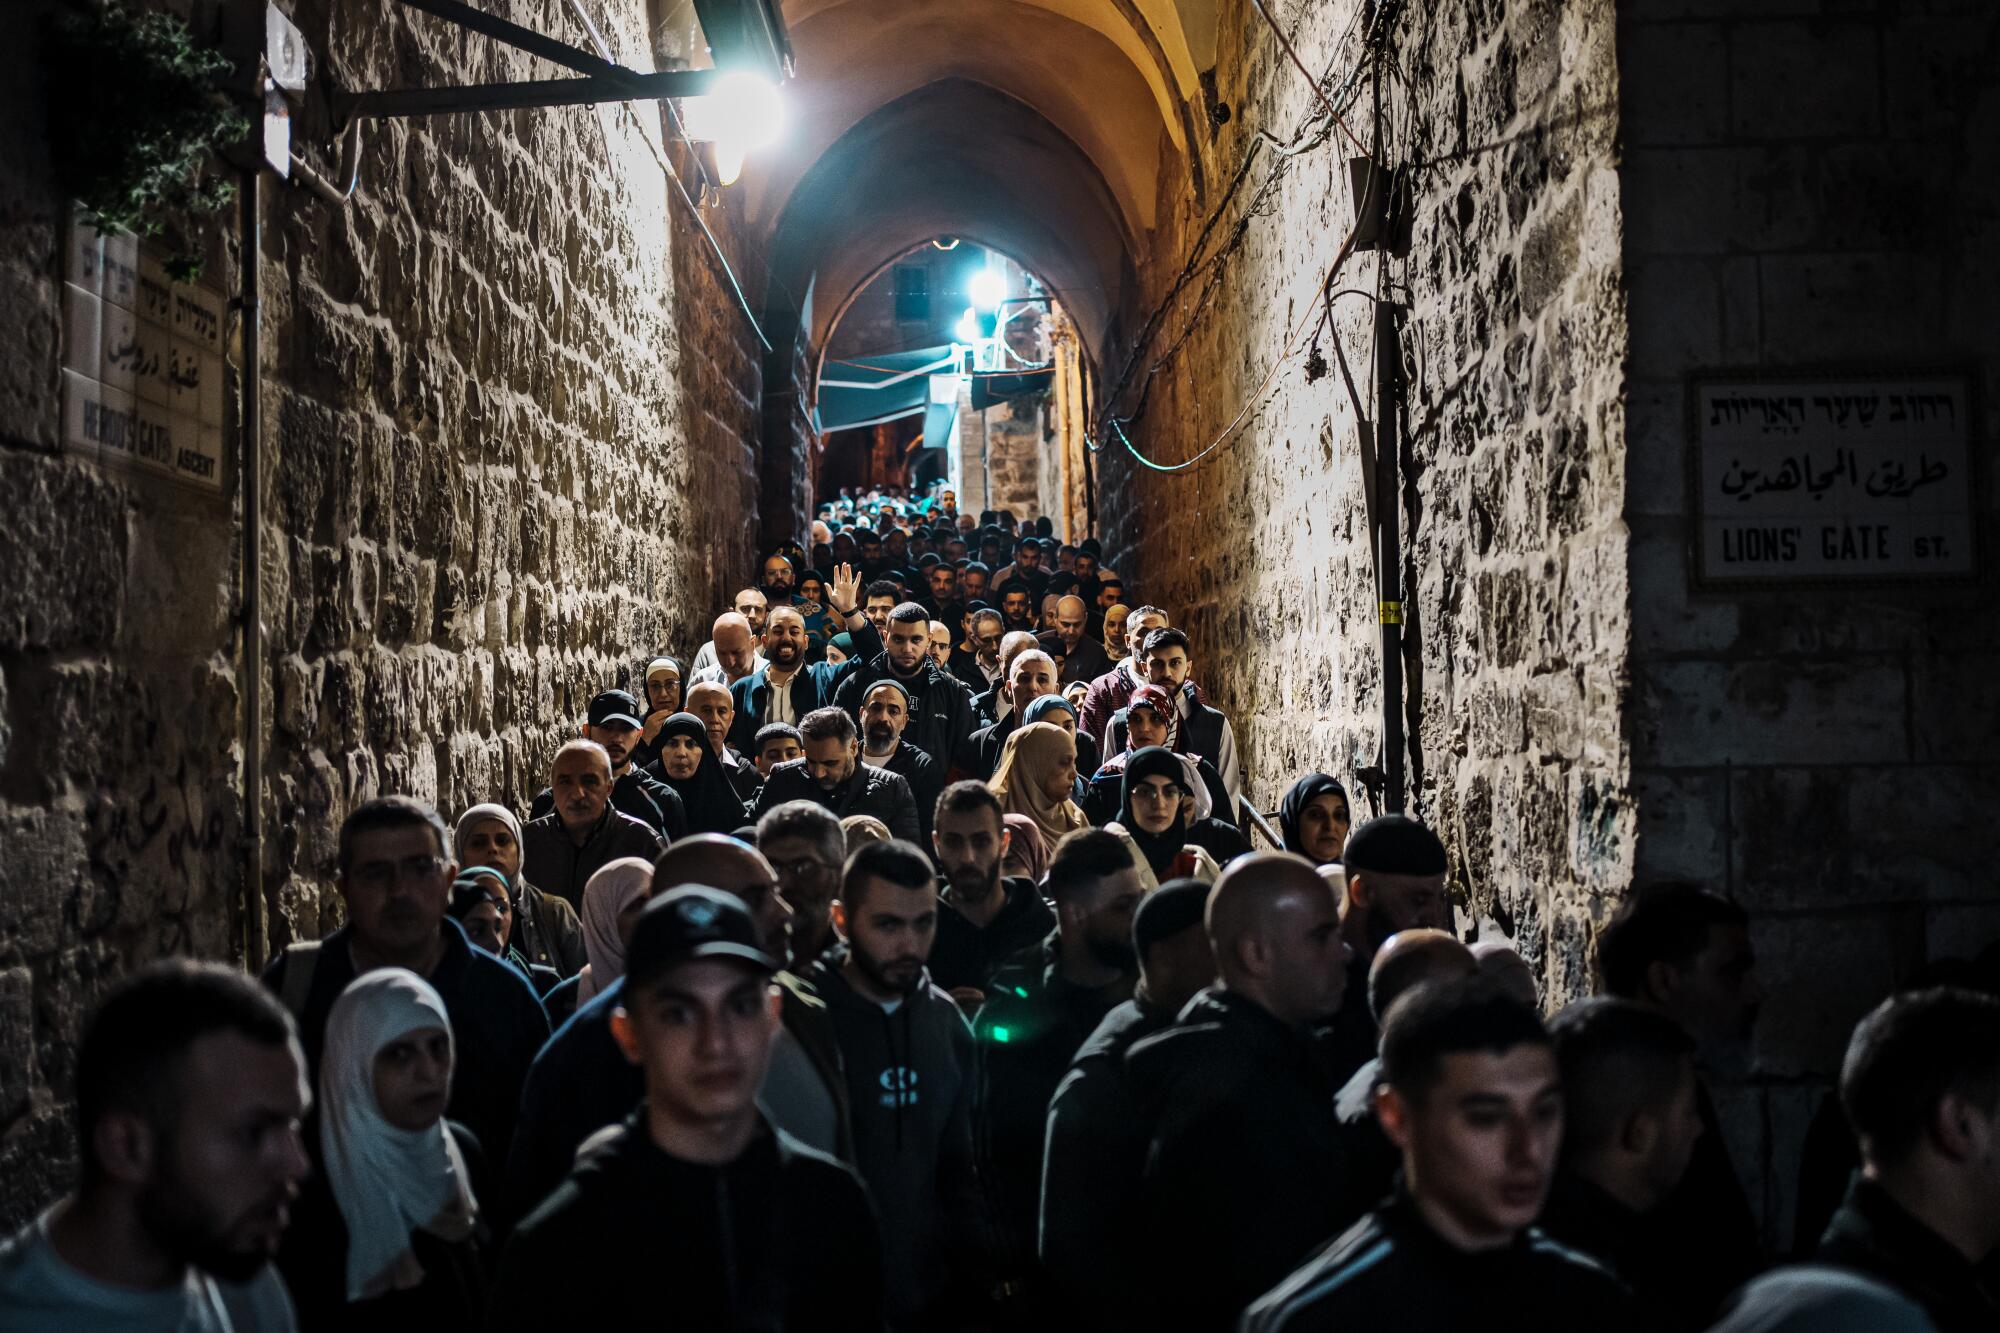 Muslims make their way to Al Aqsa Mosque along a path devoid of Ramadan decorations.